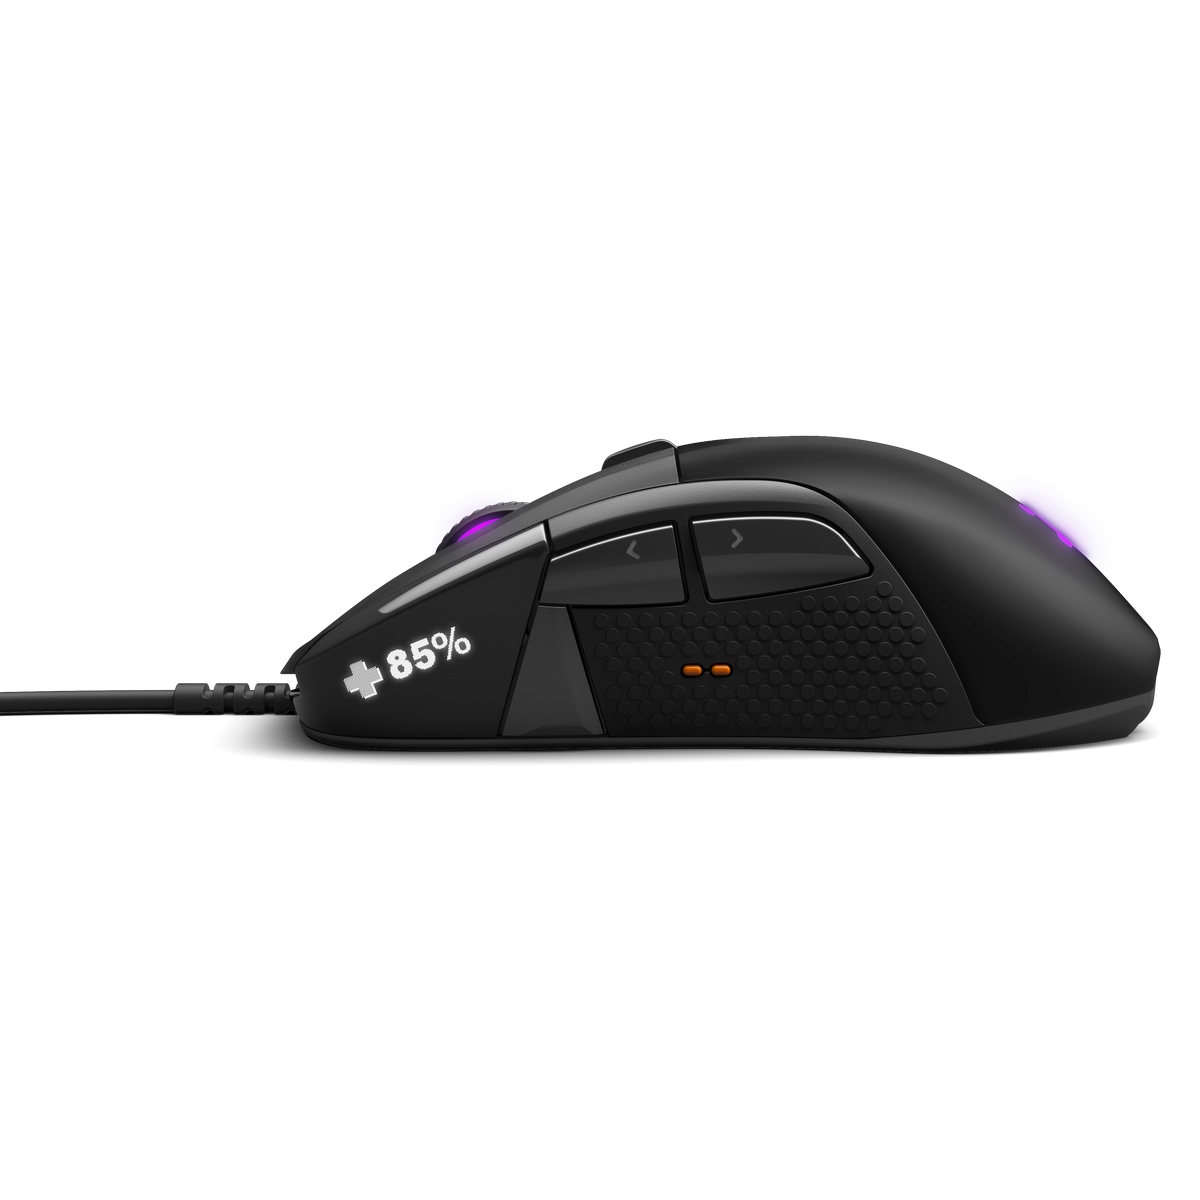 Steelseries - Steelseries Rival 710 RGB Optical USB Gaming Mouse (62334)